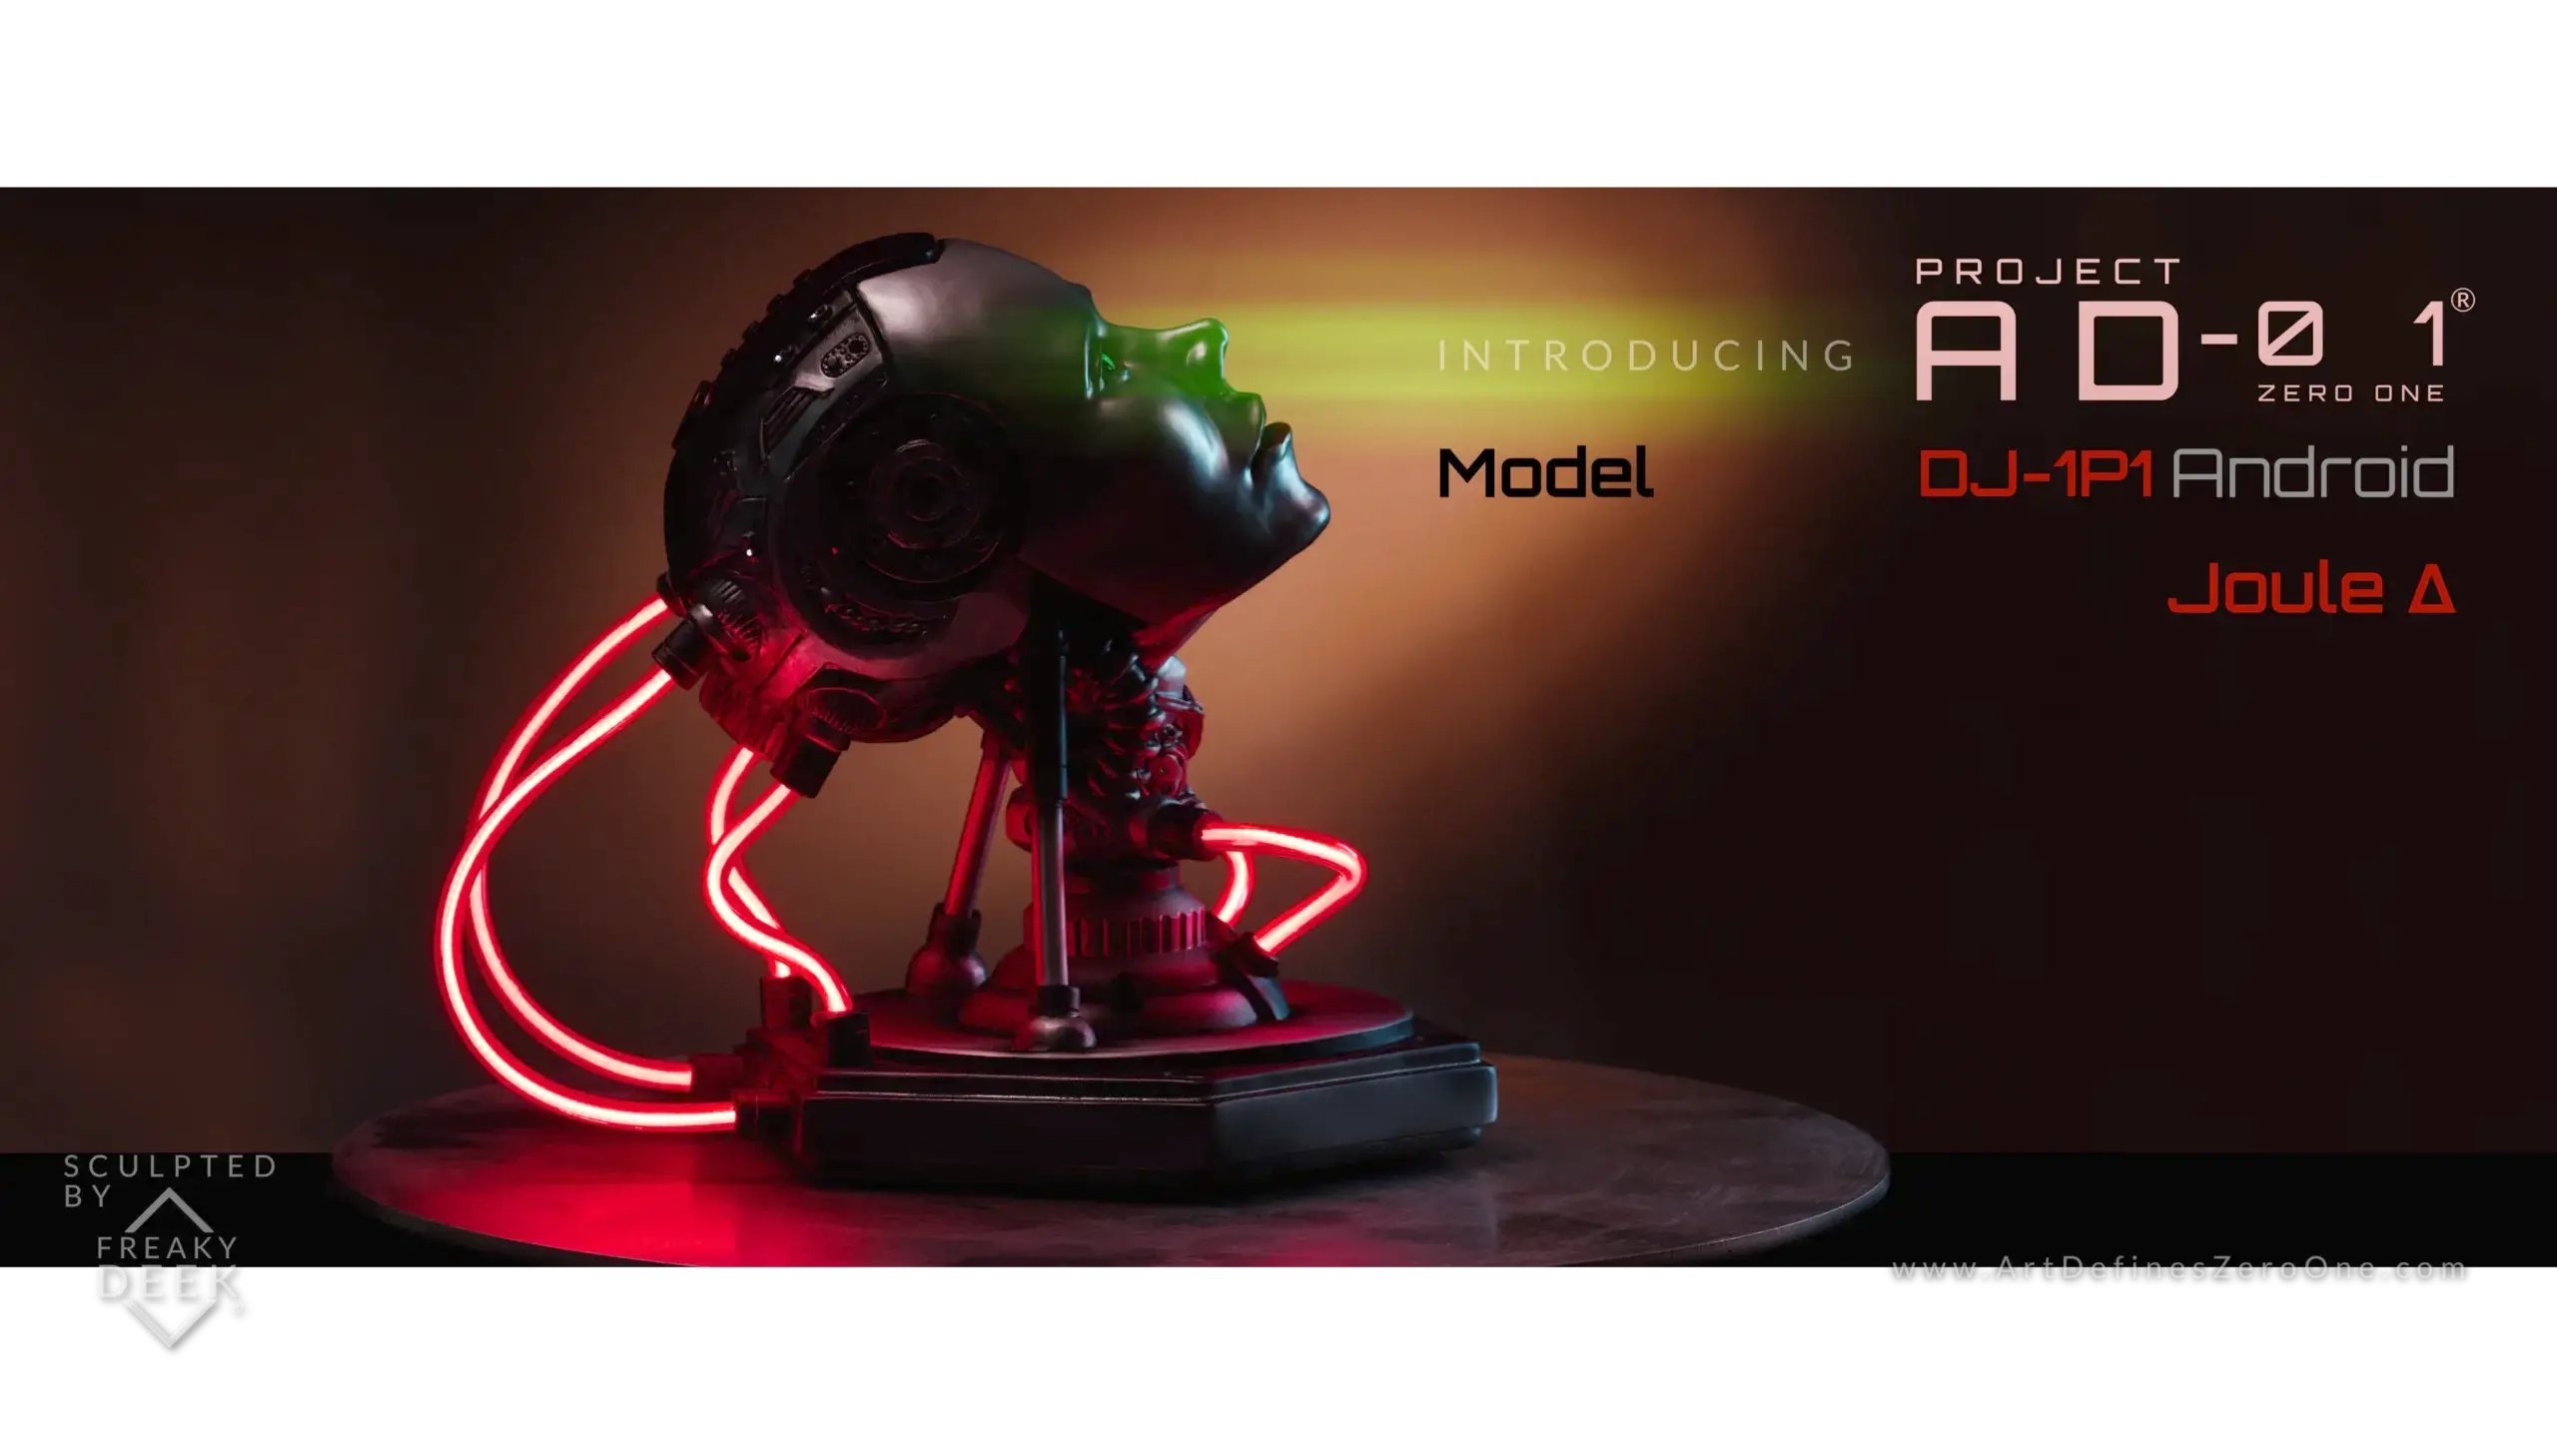 Project AD-01 handmade android sculpture Joule with red LED light side view